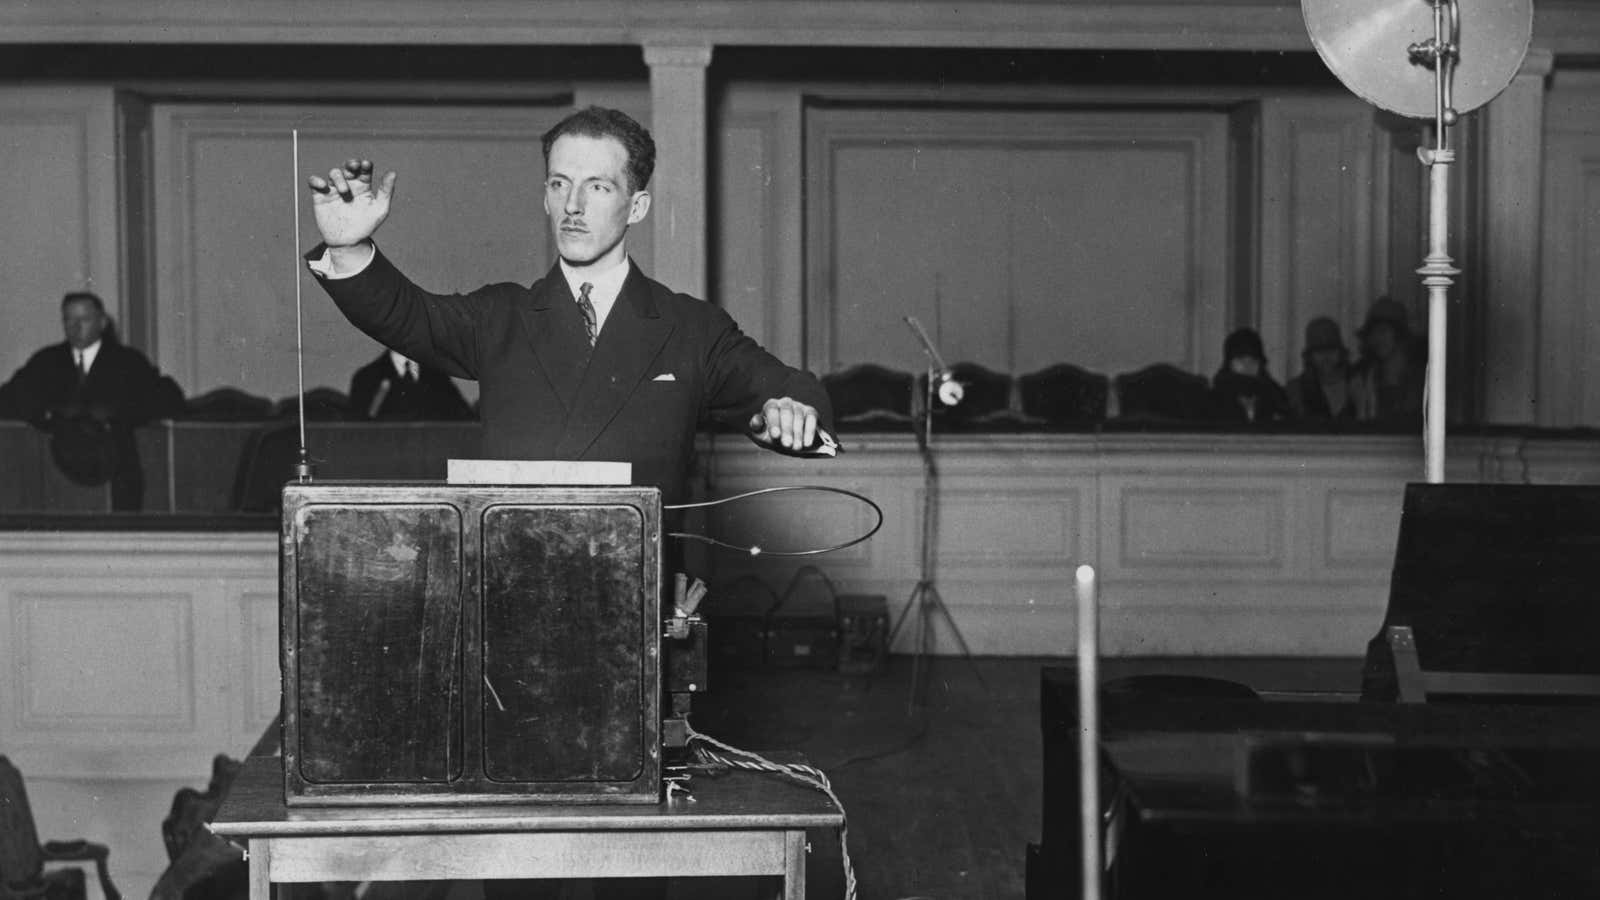 Russian engineer Professor Leon Theremin performs on his invention, the ‘Thereminvox, New York, New York, 1920s or 1930s. (Photo by Soibelman Syndicate/Visual Studies Workshop/Getty Images)